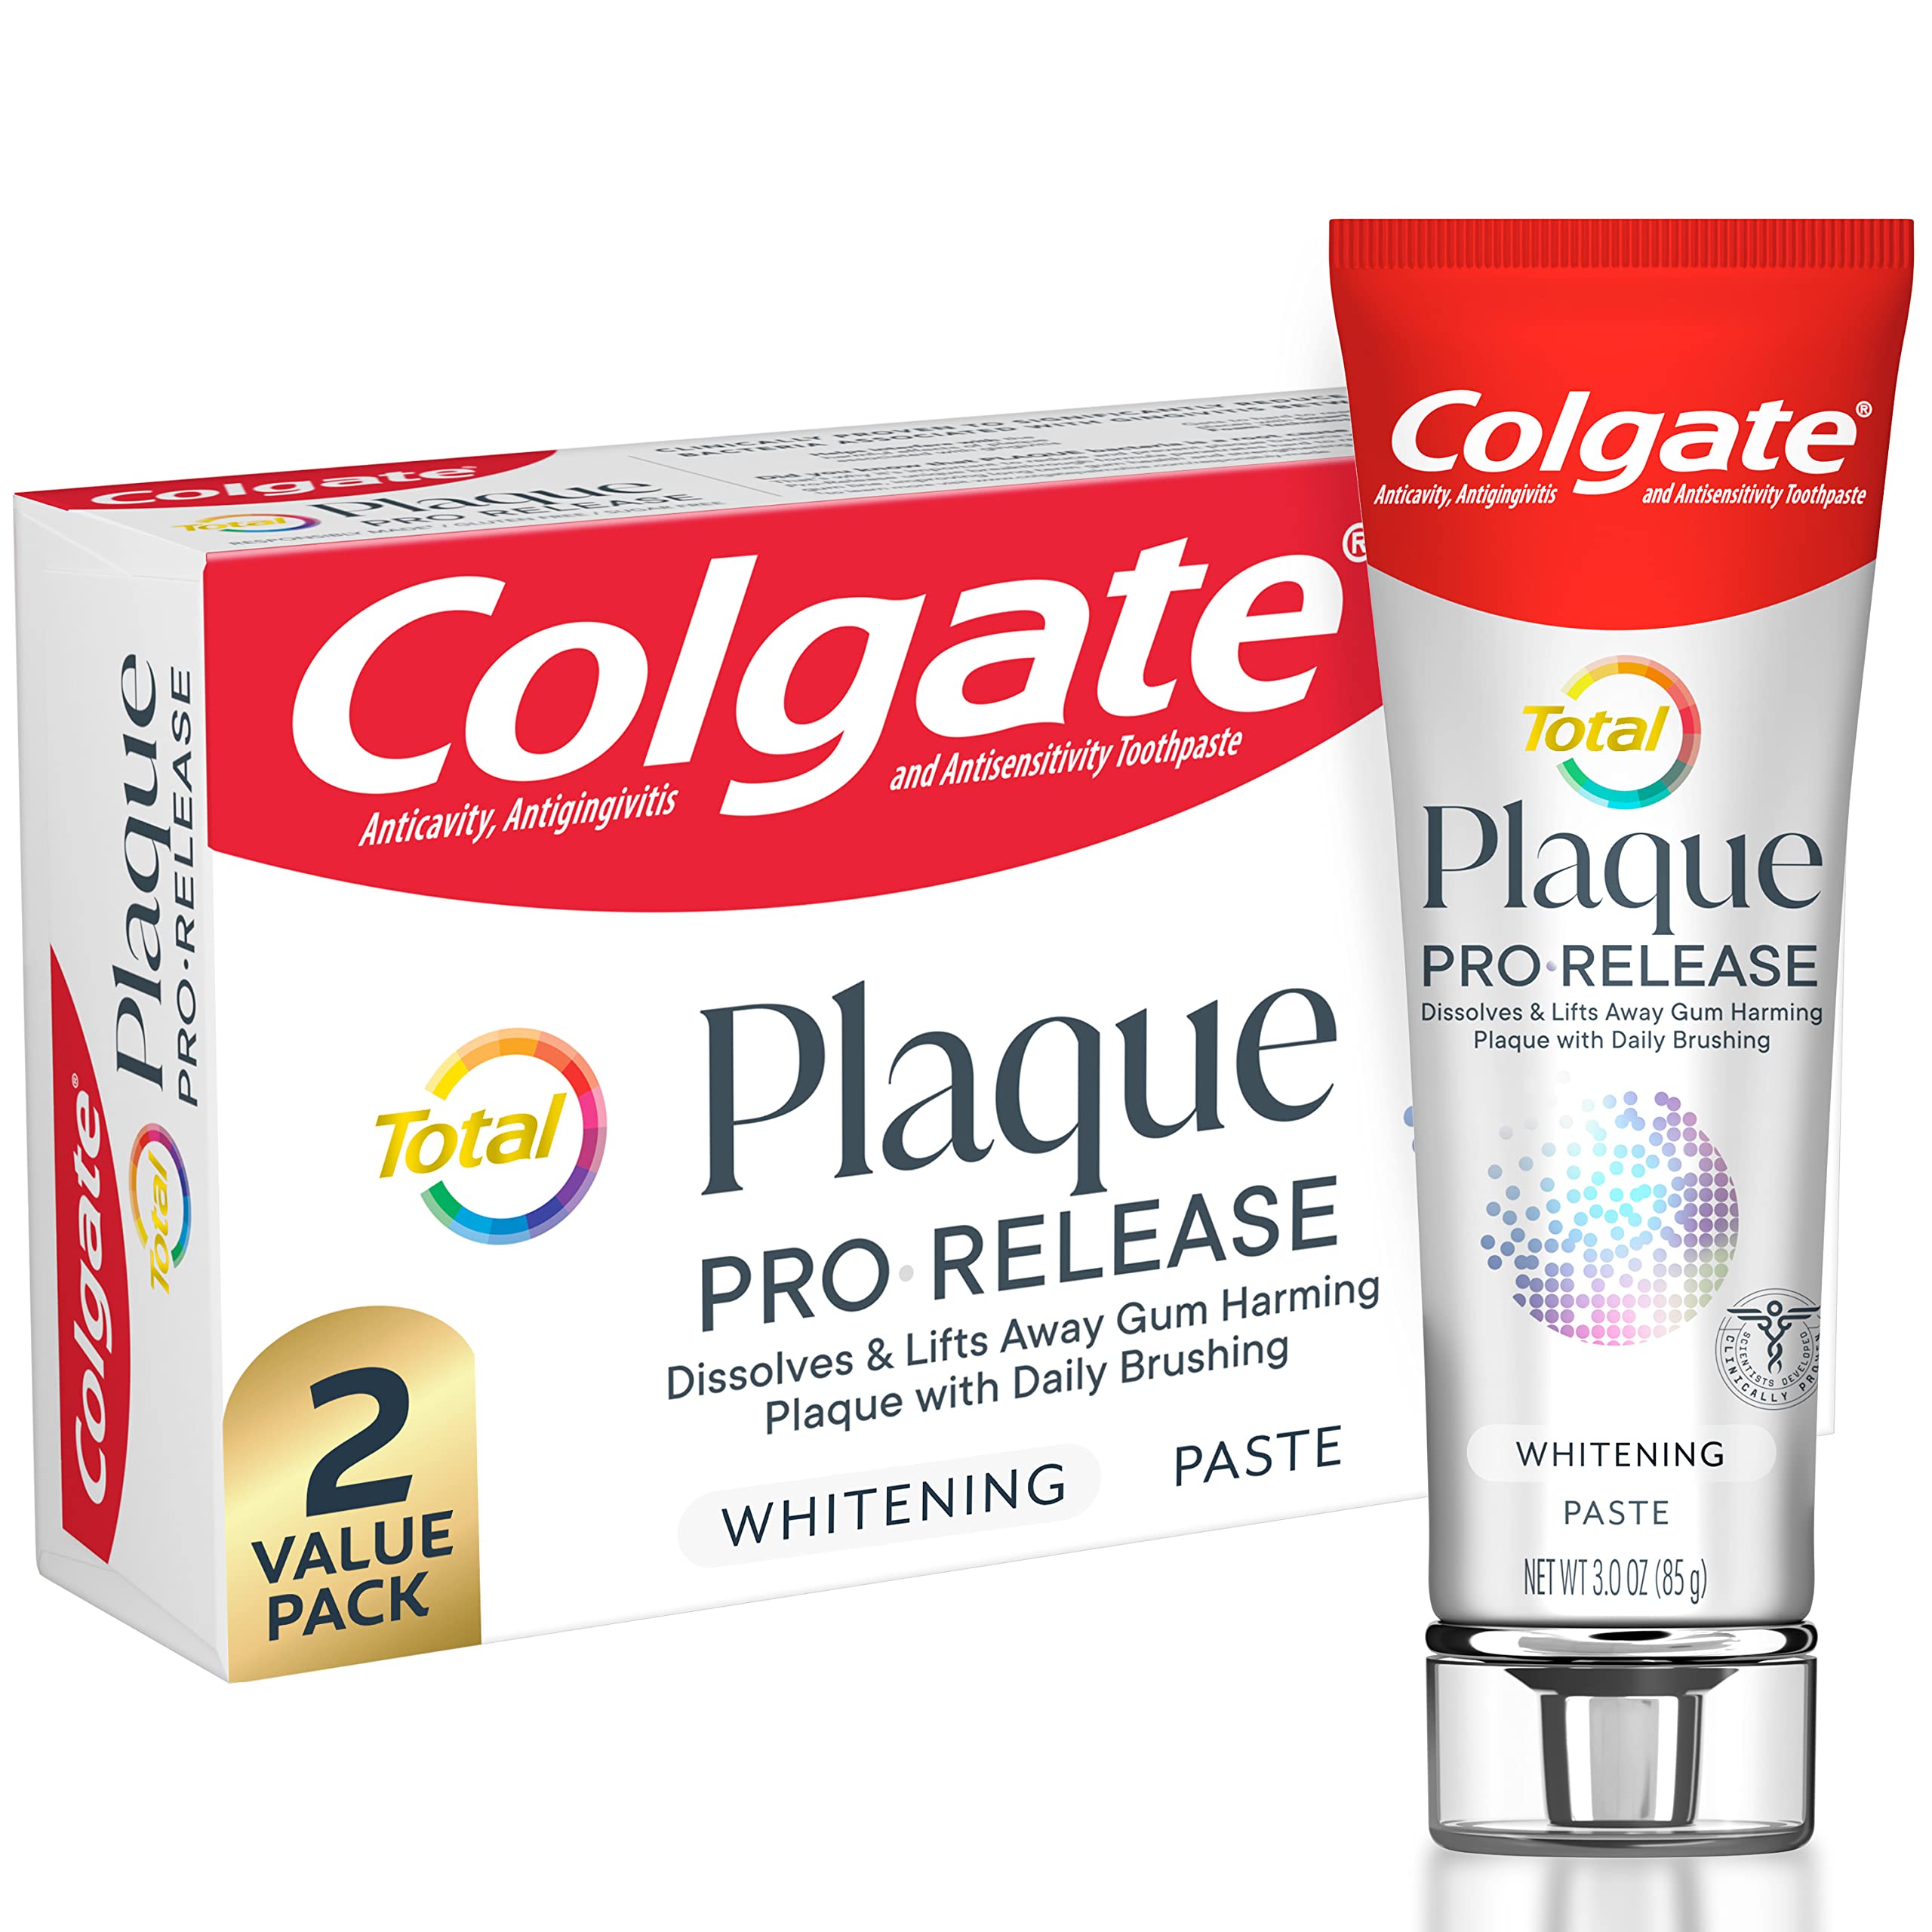 Colgate Total Plaque Pro Release Whitening Toothpaste, 3 Oz Tube, 2 Pack